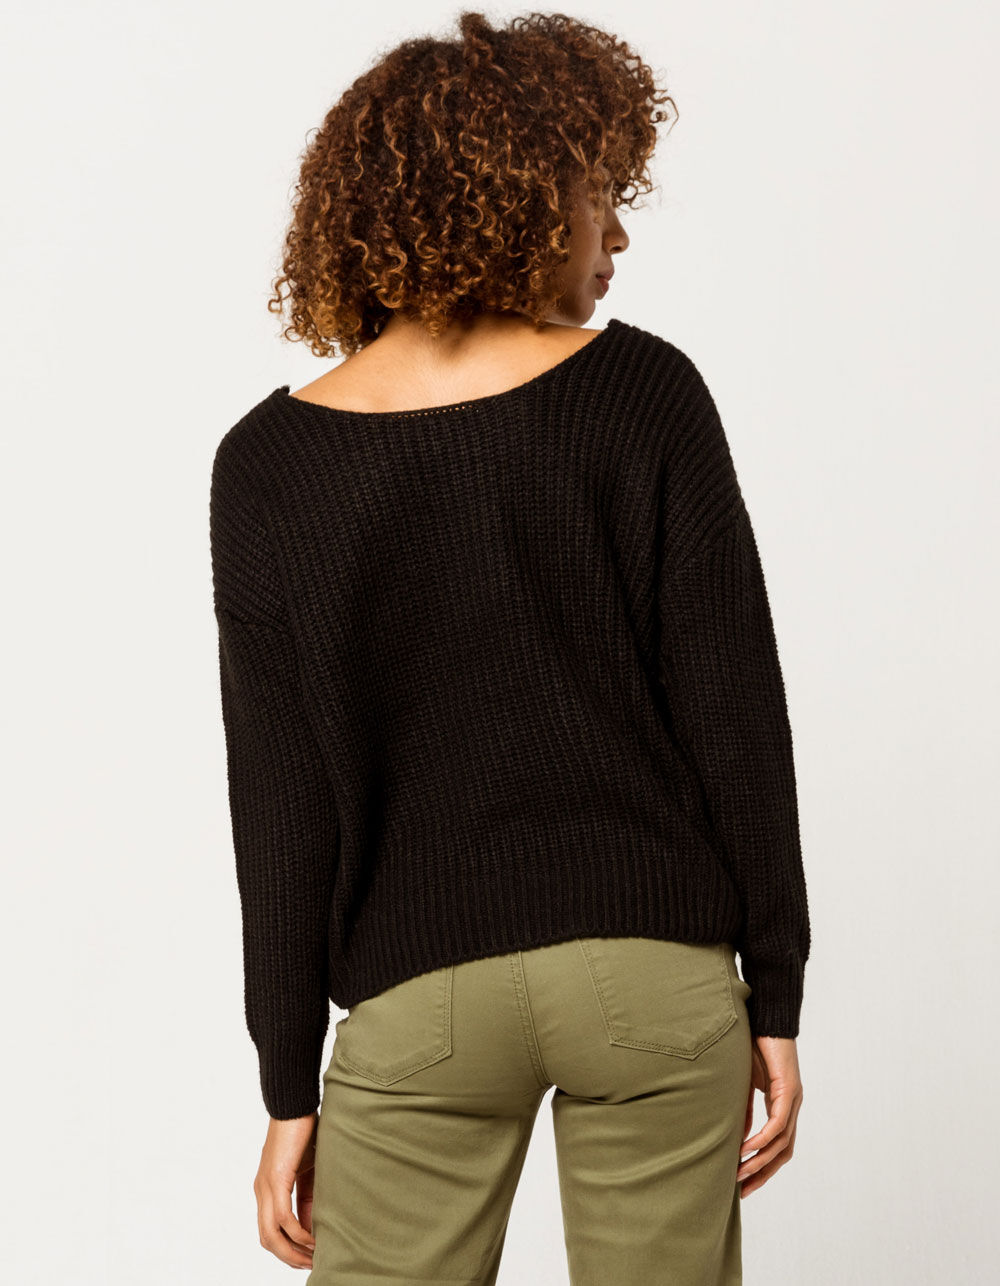 SKY AND SPARROW Twist Front Womens Pullover - BLACK | Tillys